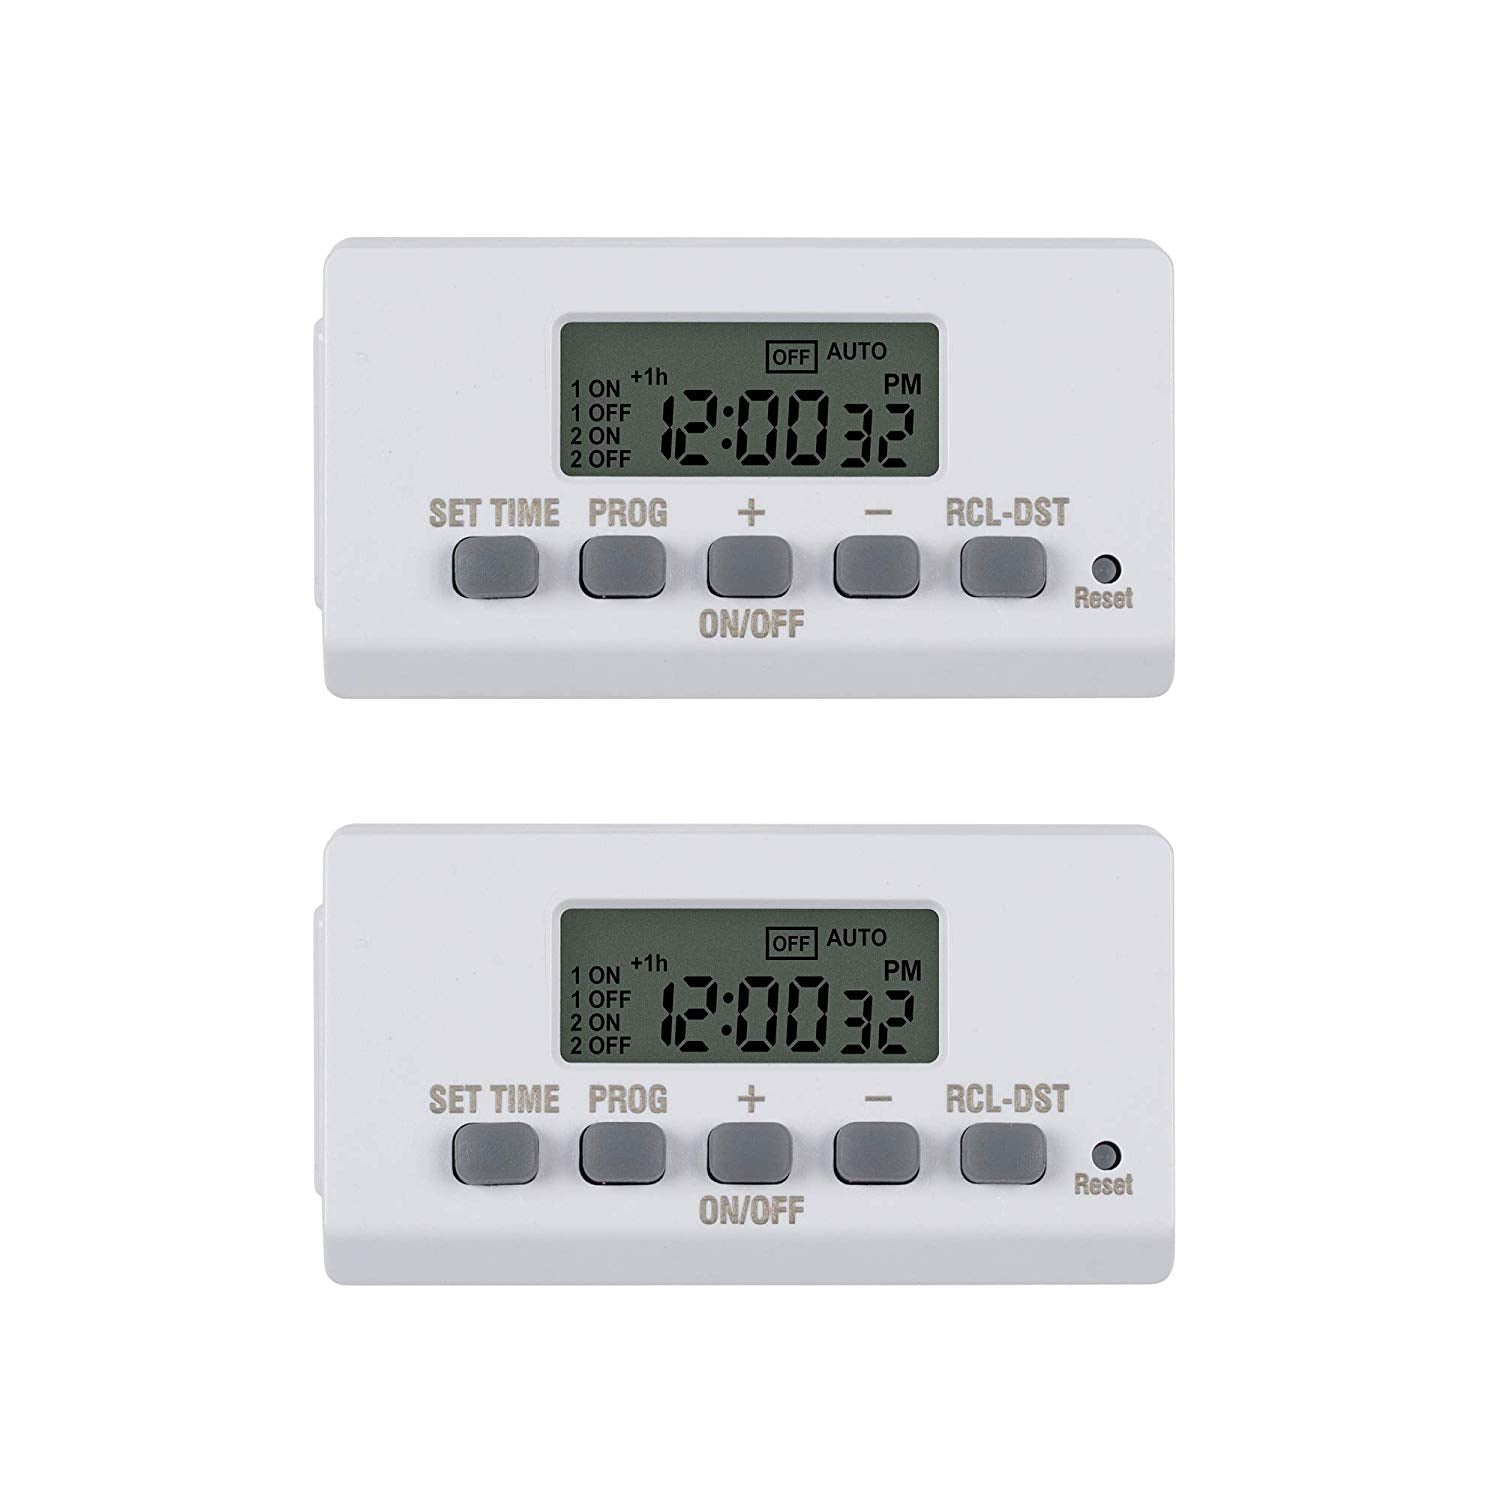 BN-LINK Indoor Timers Plug Mechanical 2 Prong 24-Hour Mini Lamp Timers 2  Pack, for Electrical Outlets, Fish Tank, Fans, LED Lights